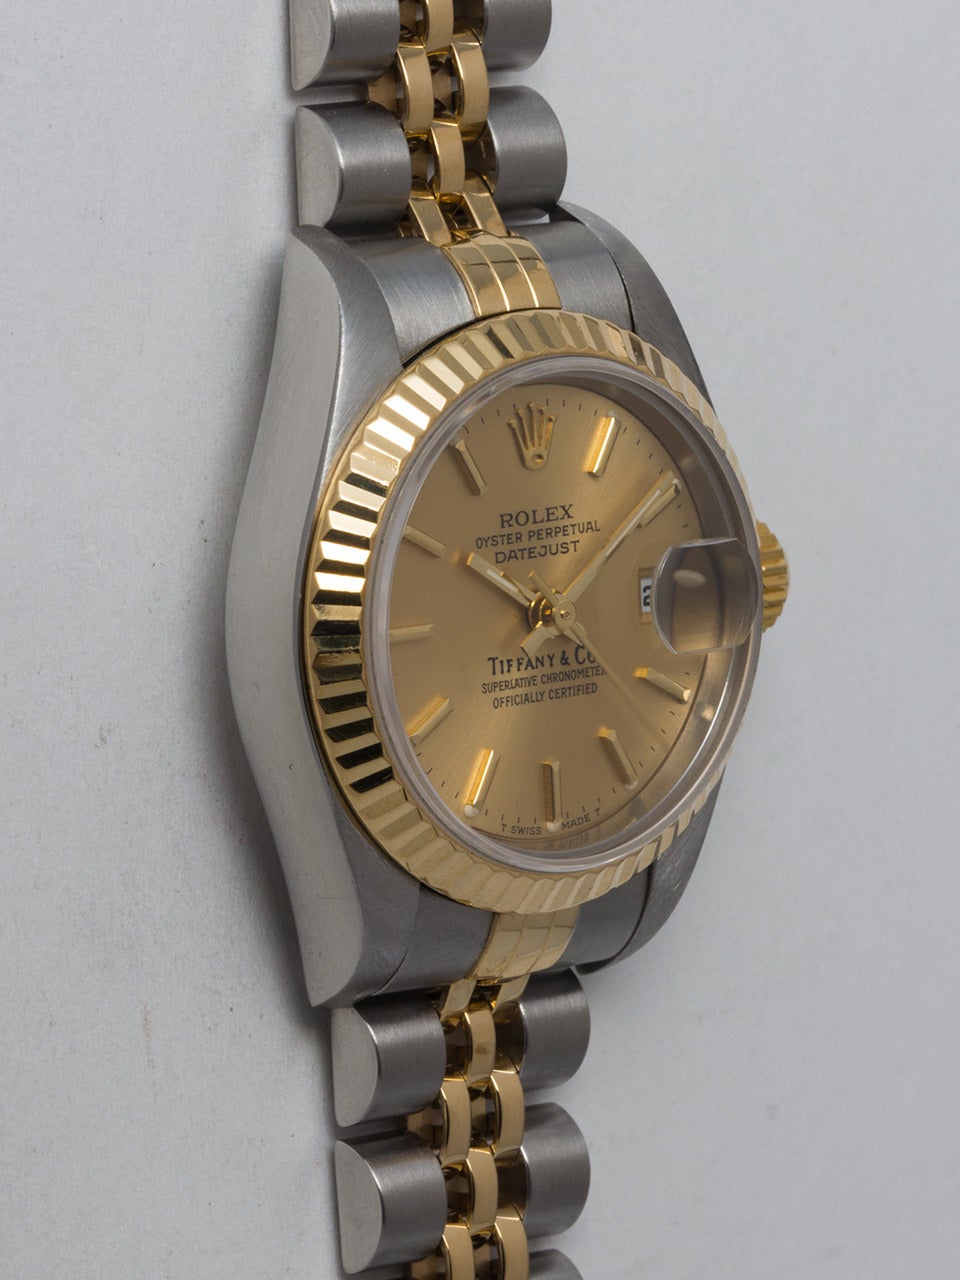 Rolex Lady's Stainless Steel and 18K Yellow Gold Datejust Wristwatch Retailed by Tiffany & Co., Ref. 69173, serial number U2, circa 1997. 27mm diameter case with 18K yellow gold fluted bezel and sapphire crystal. Original signed Tiffany & Co